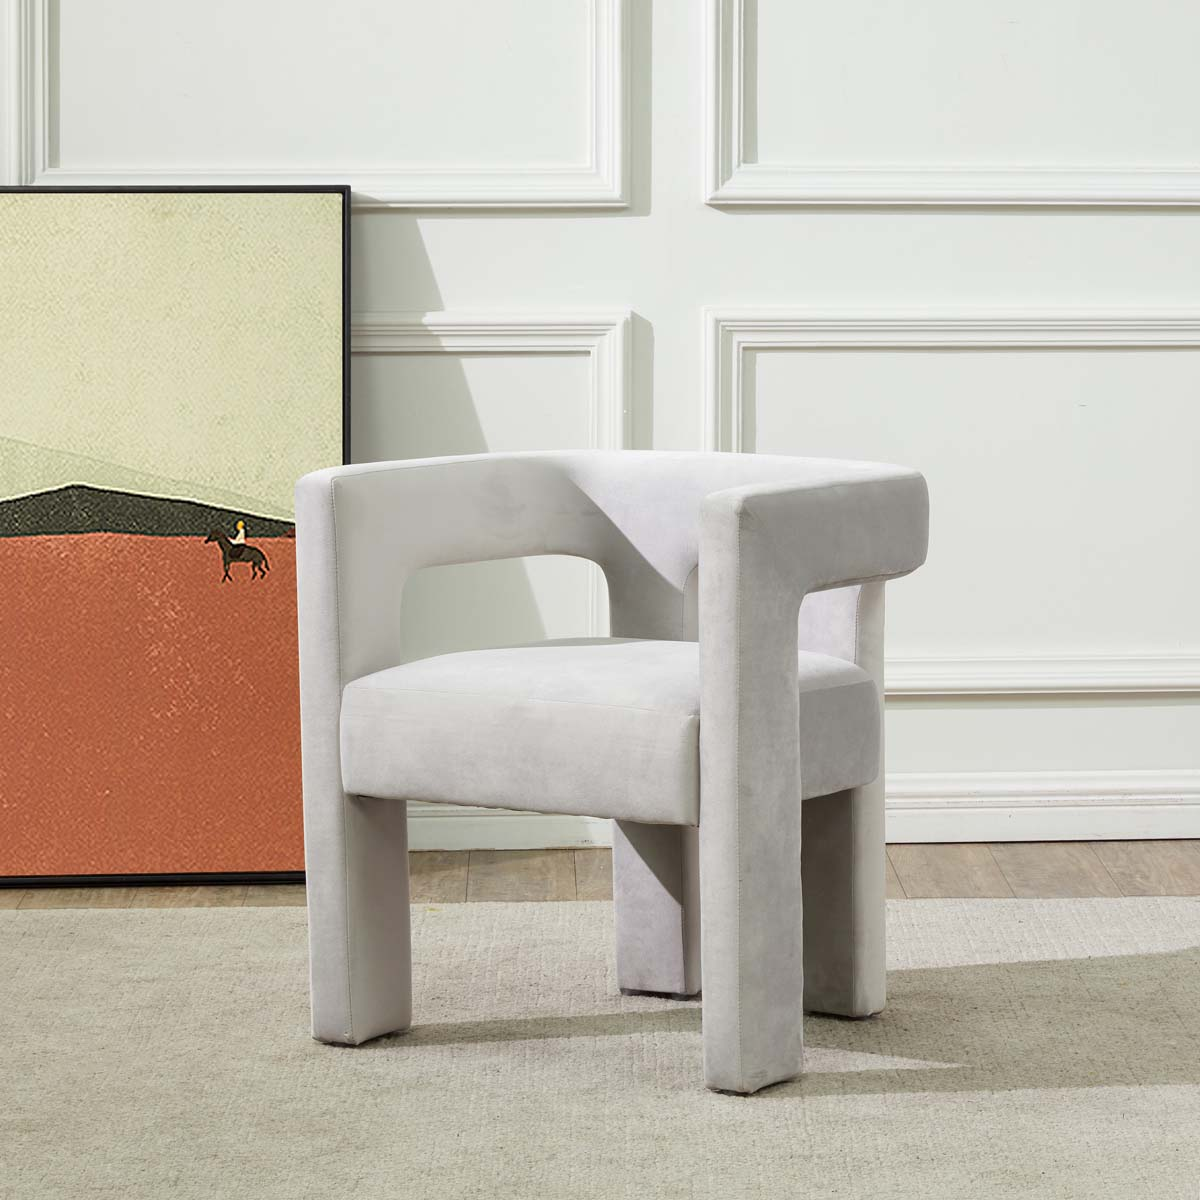 Safavieh Couture Deandre Contemporary Dining Chair - Light Grey